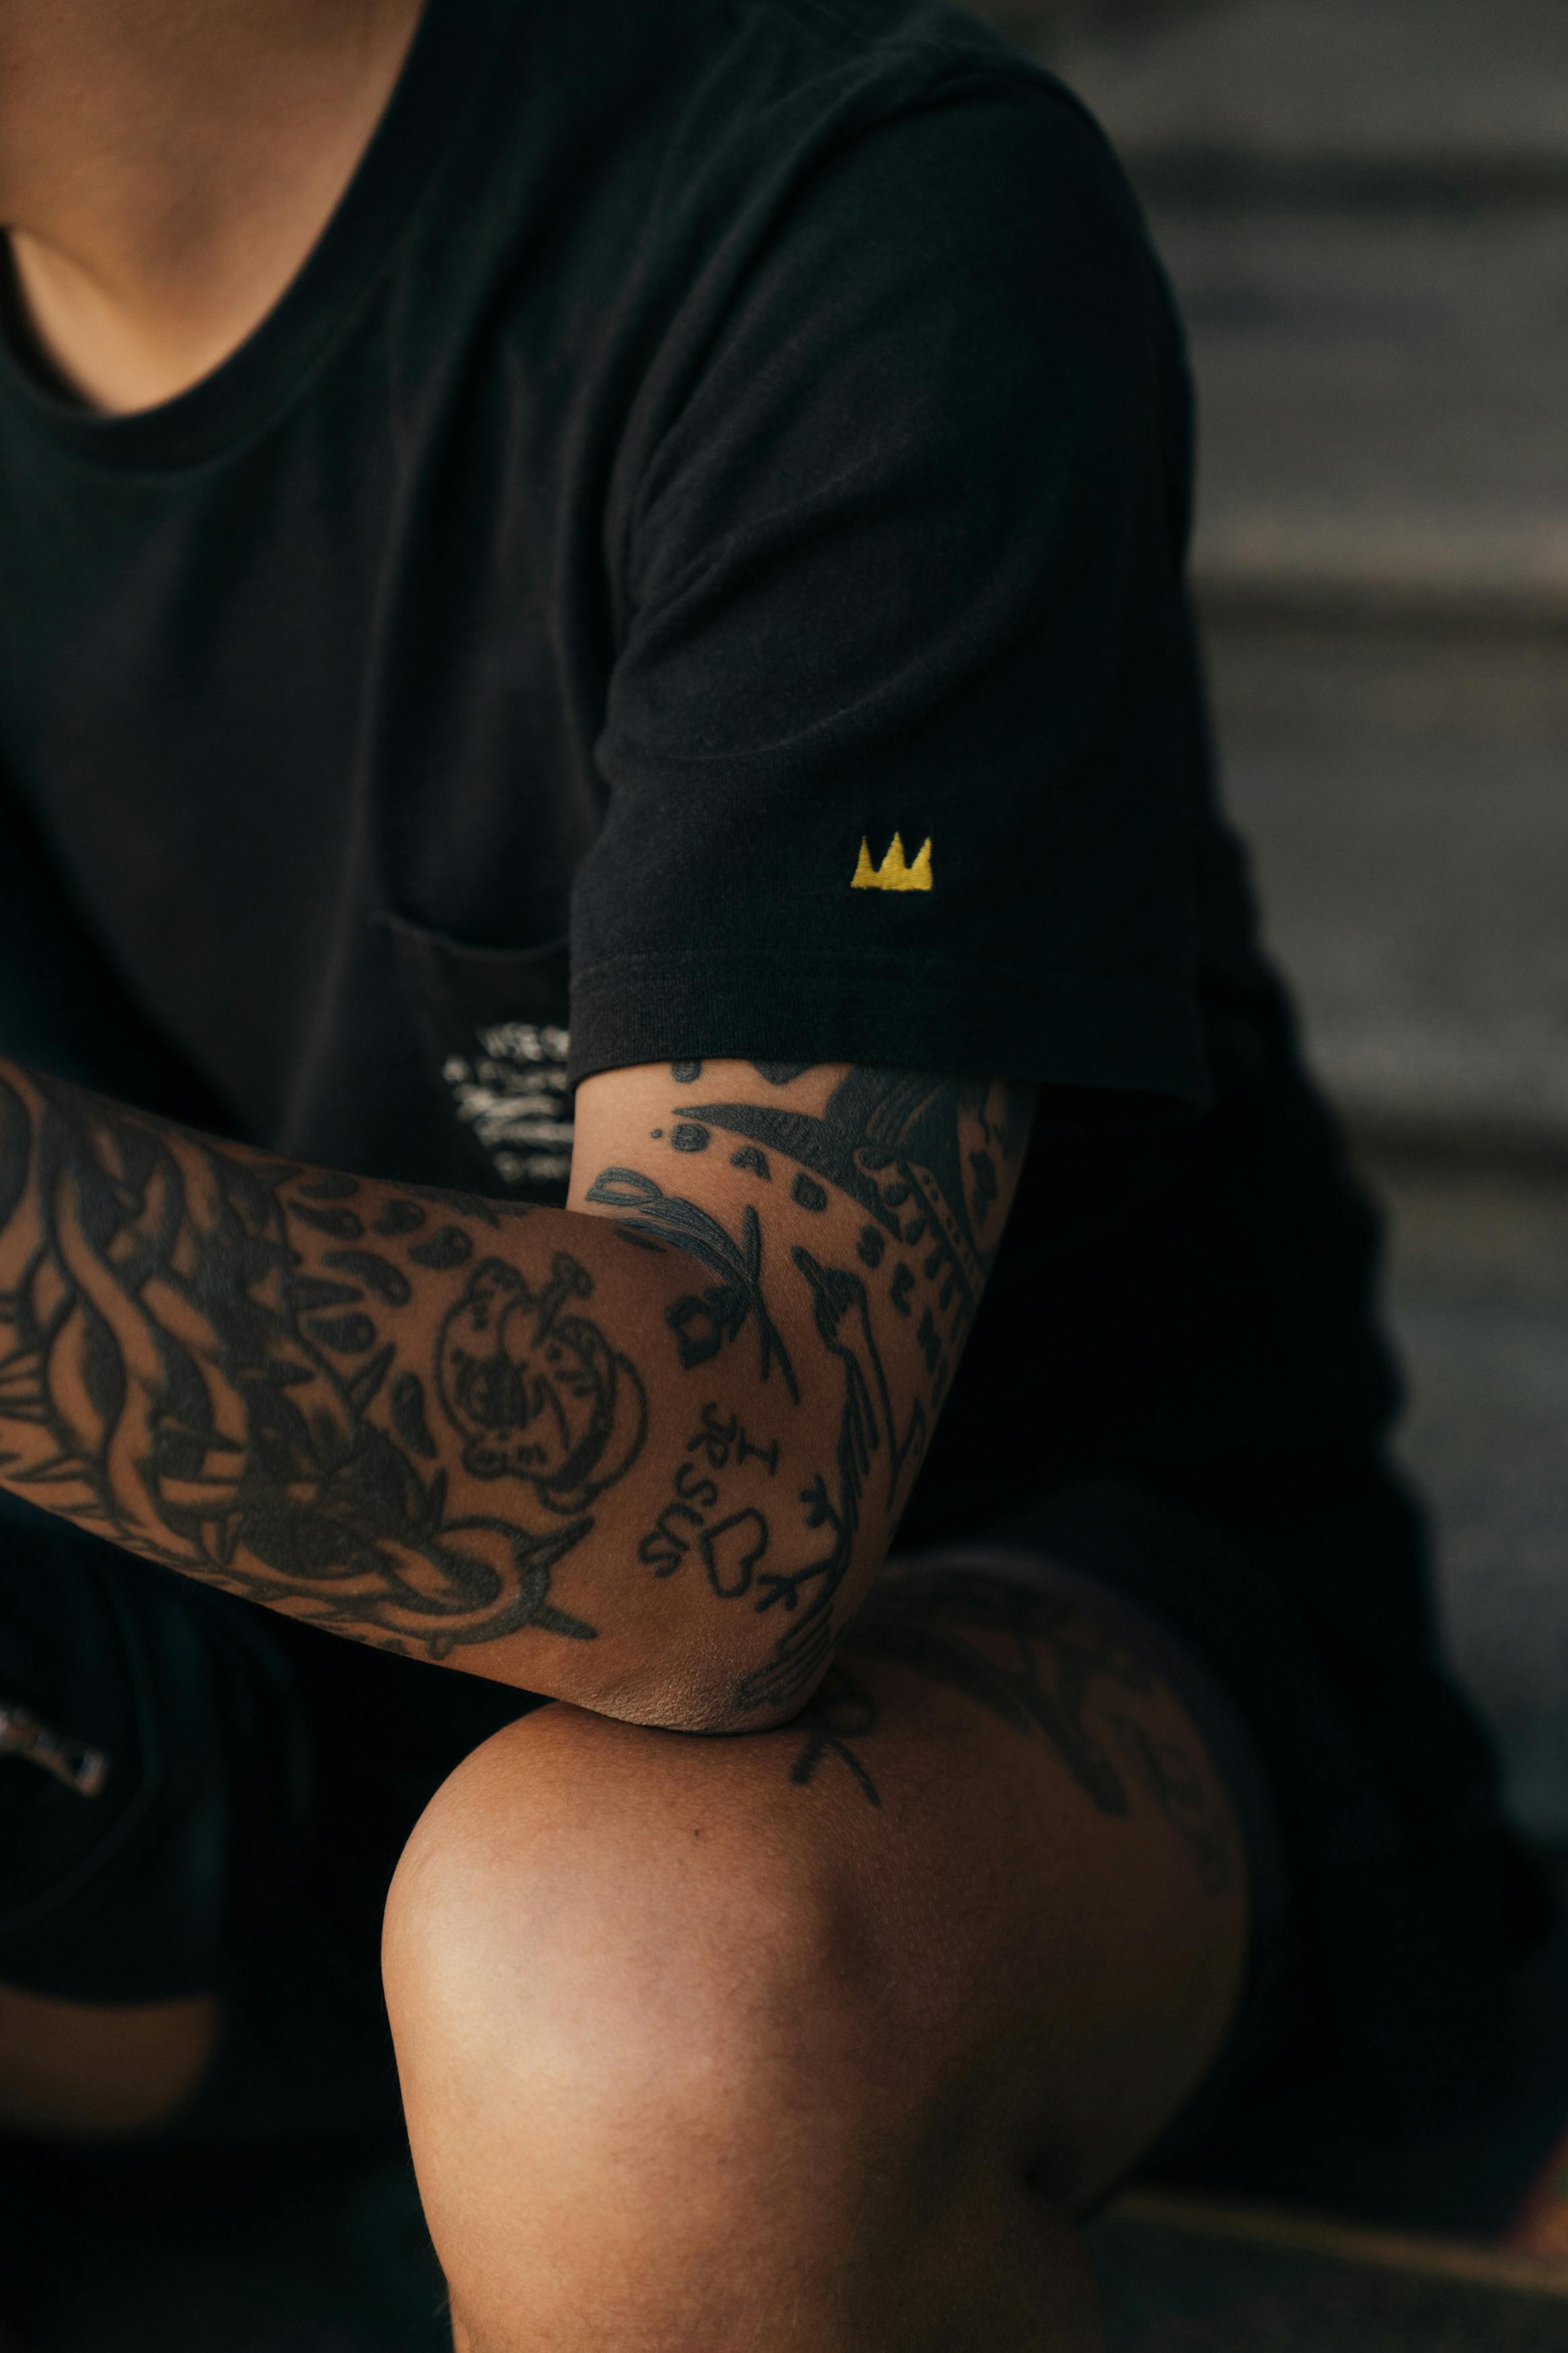 Man in Black Crew Neck Shirt with Arm Tattoo · Free Stock Photo